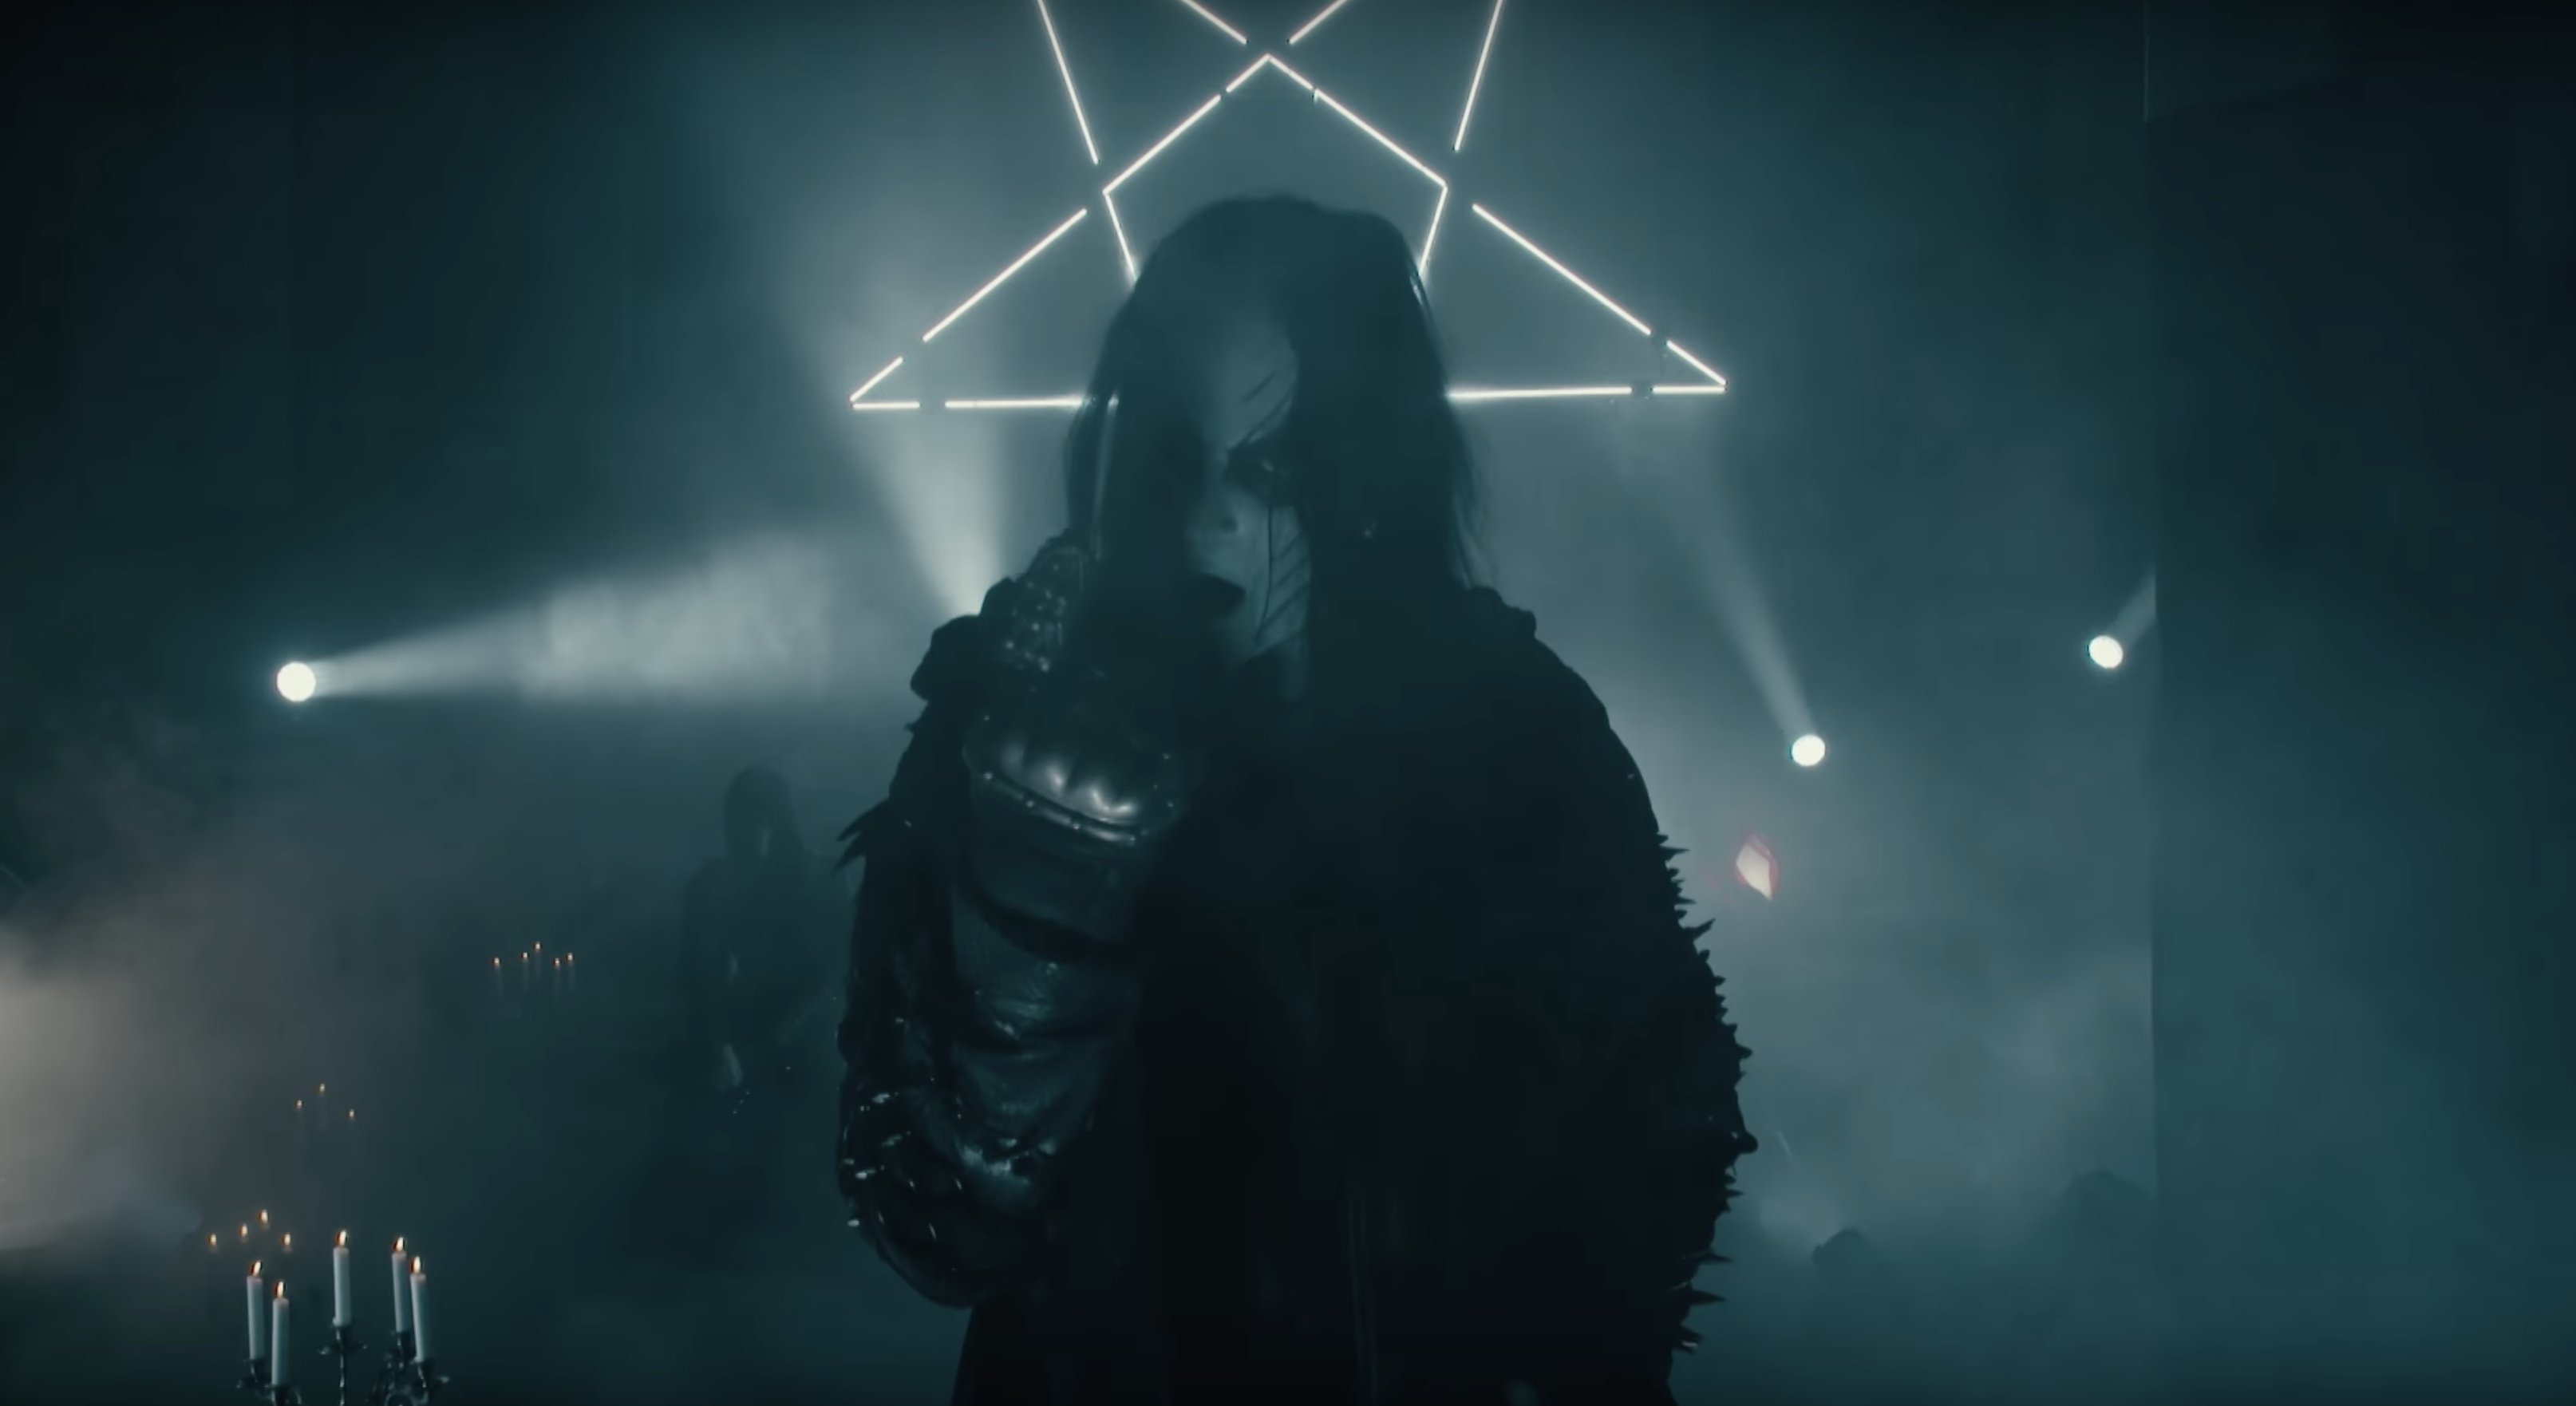 Dimmu Borgir's New Song 'Eonian': Listen to Their First Release in 8 Years